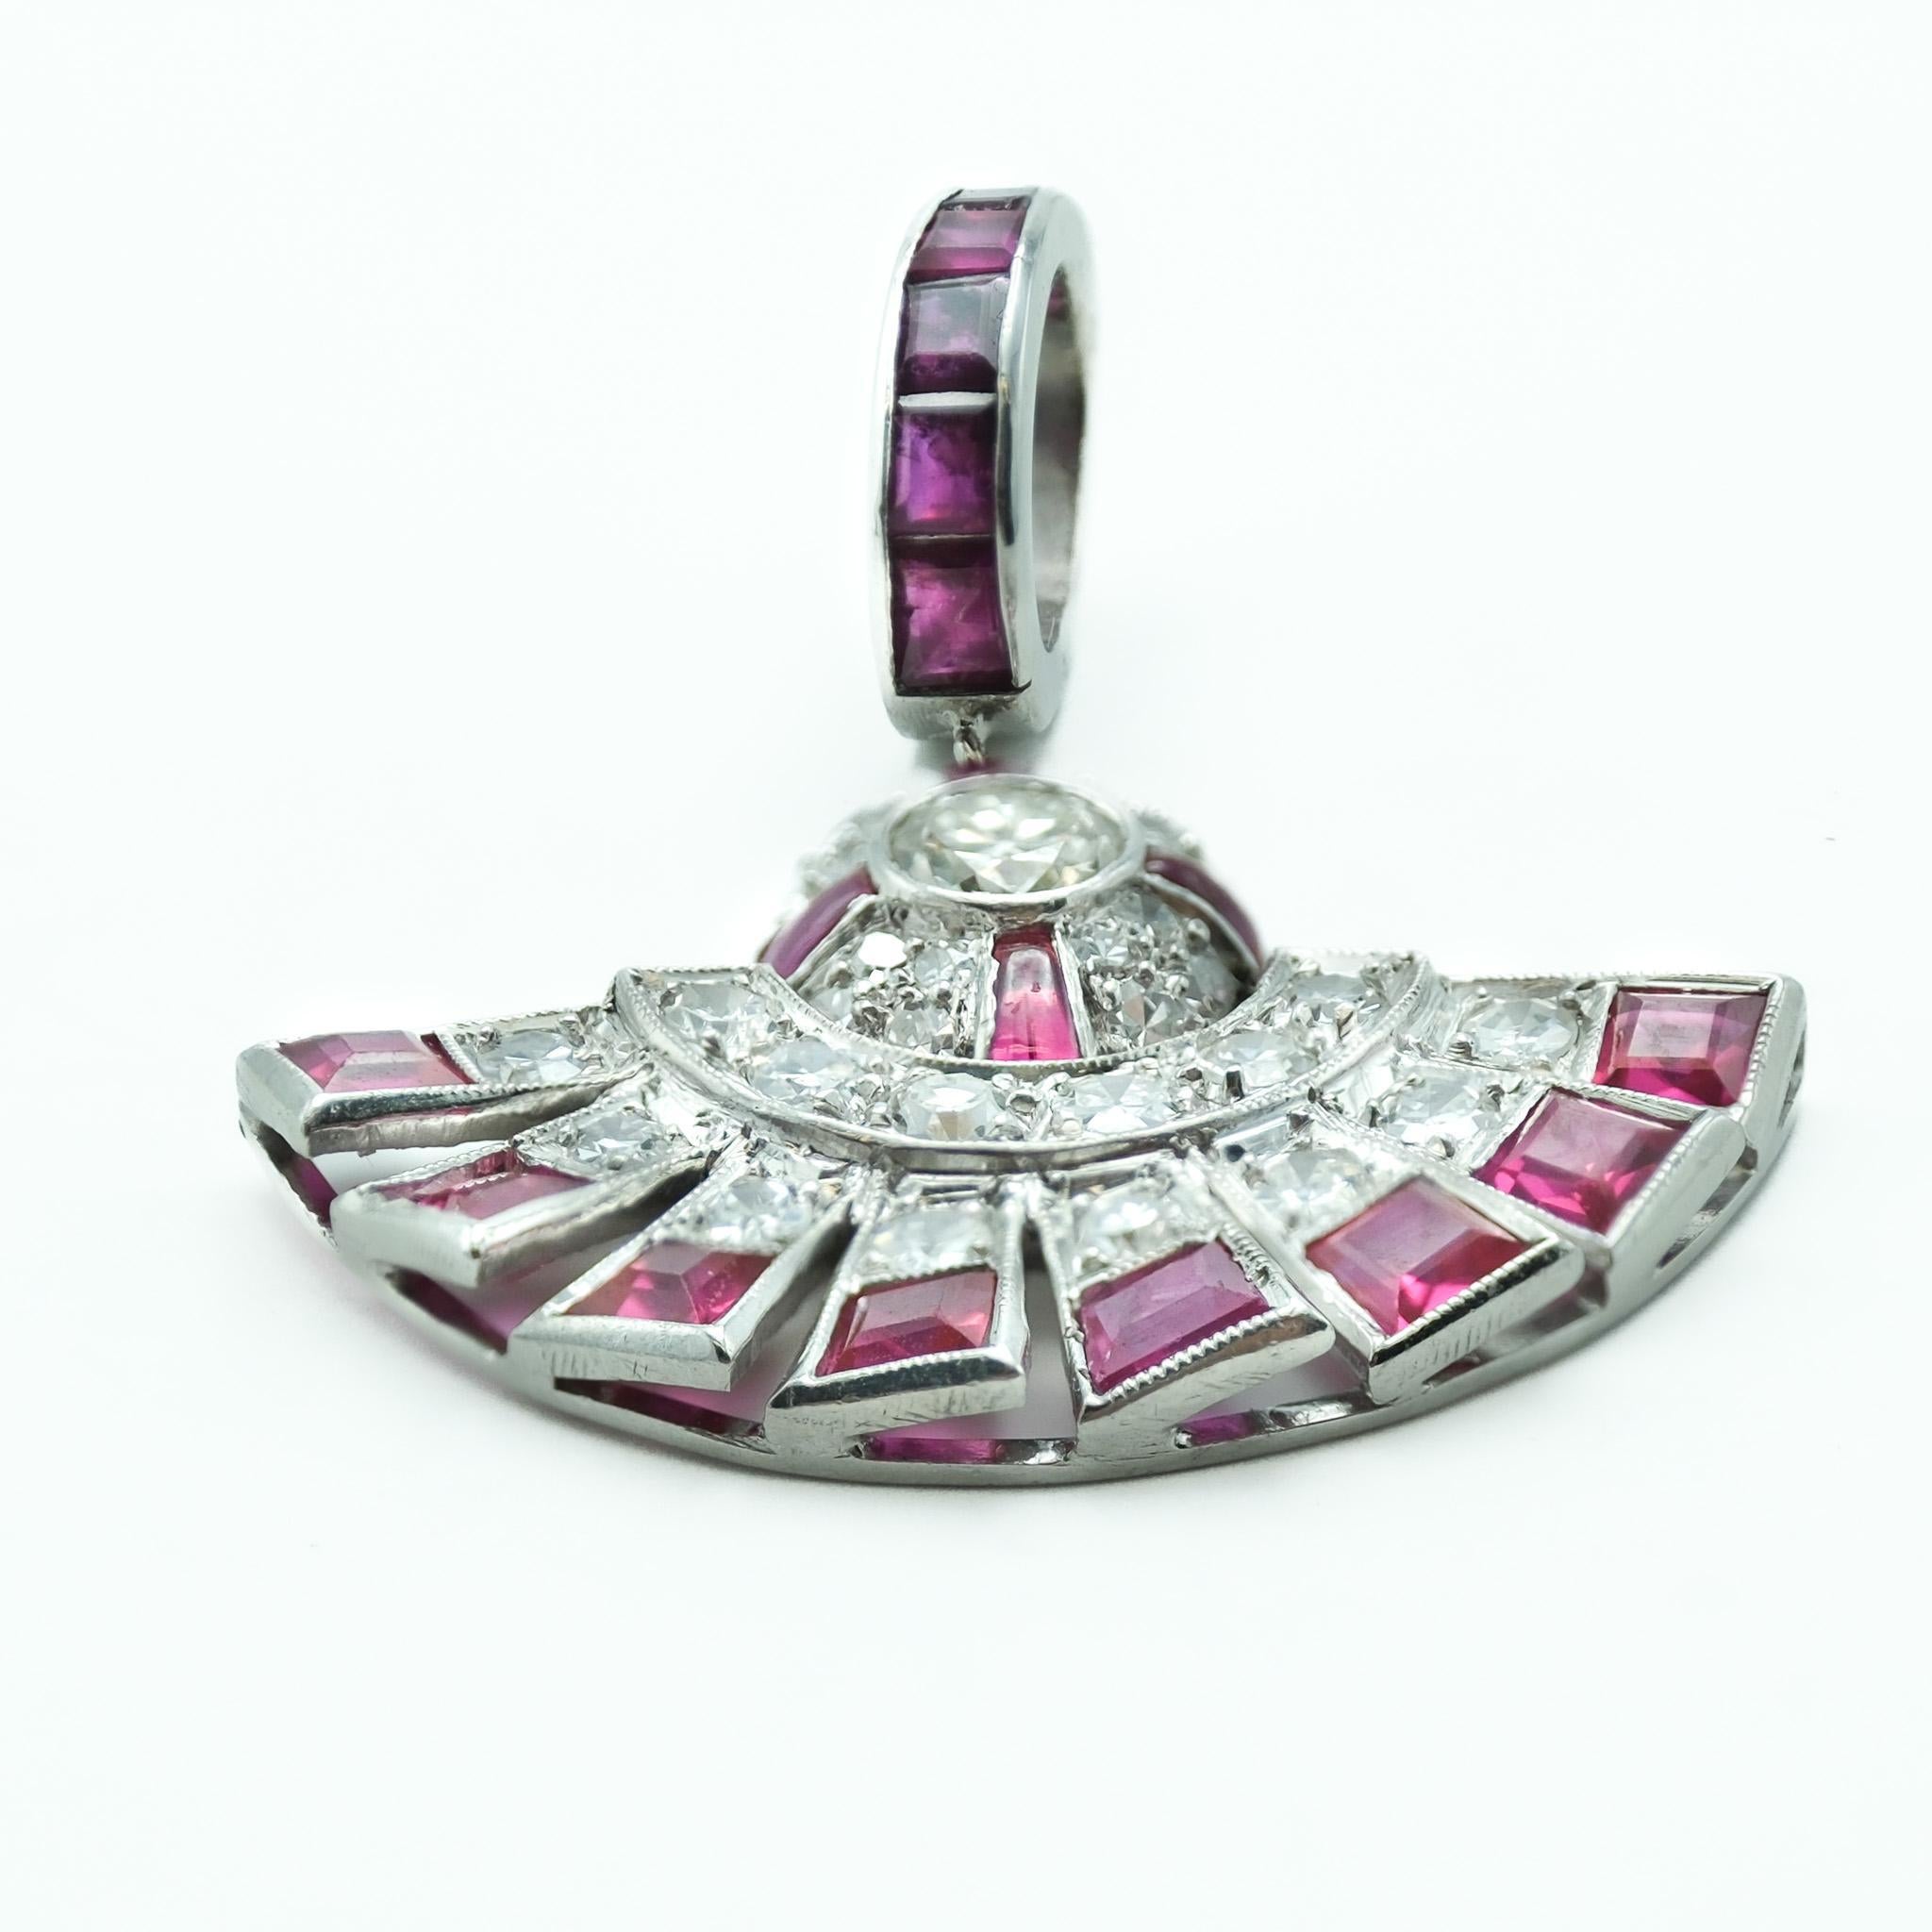 This pendant is a striking example of Art Deco design, showcasing the era's love for bold geometric shapes and lavish decoration. Crafted from platinum, a metal prized for its strength and luster, the piece features a fan-shaped motif that is both